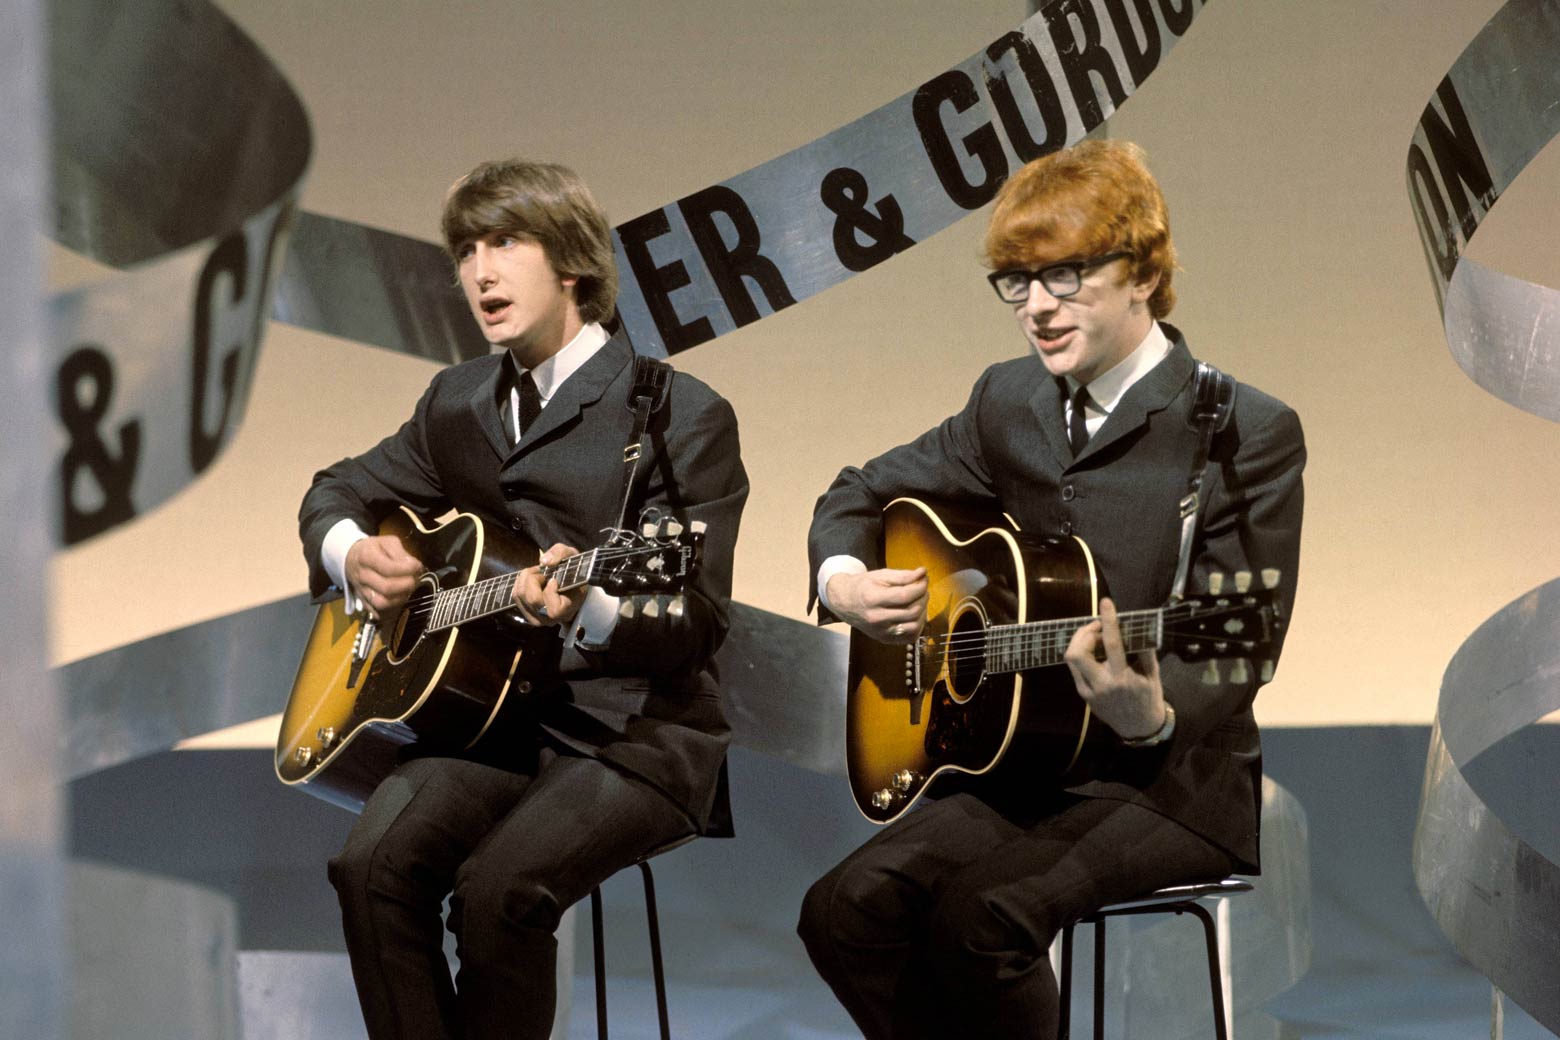 Gordon Waller and Peter Asher performing on TV.